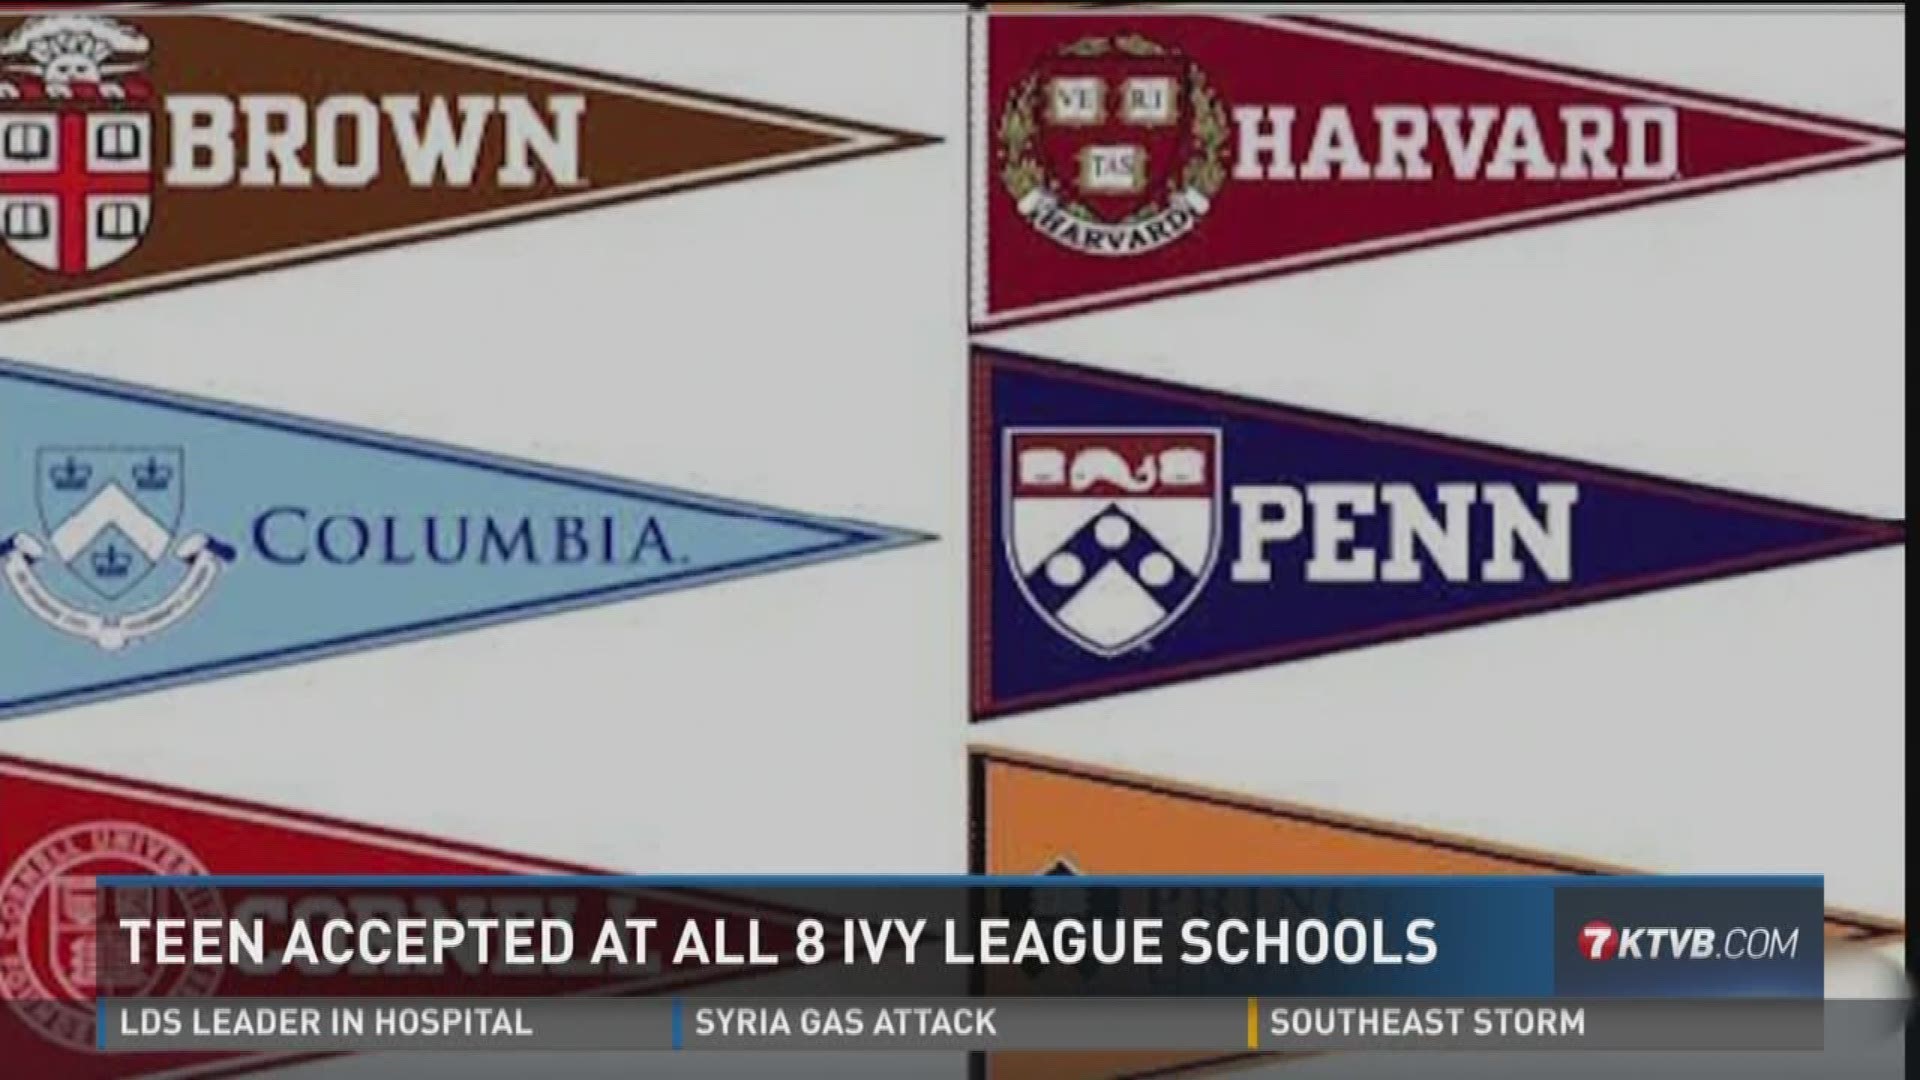 All About IVY League School